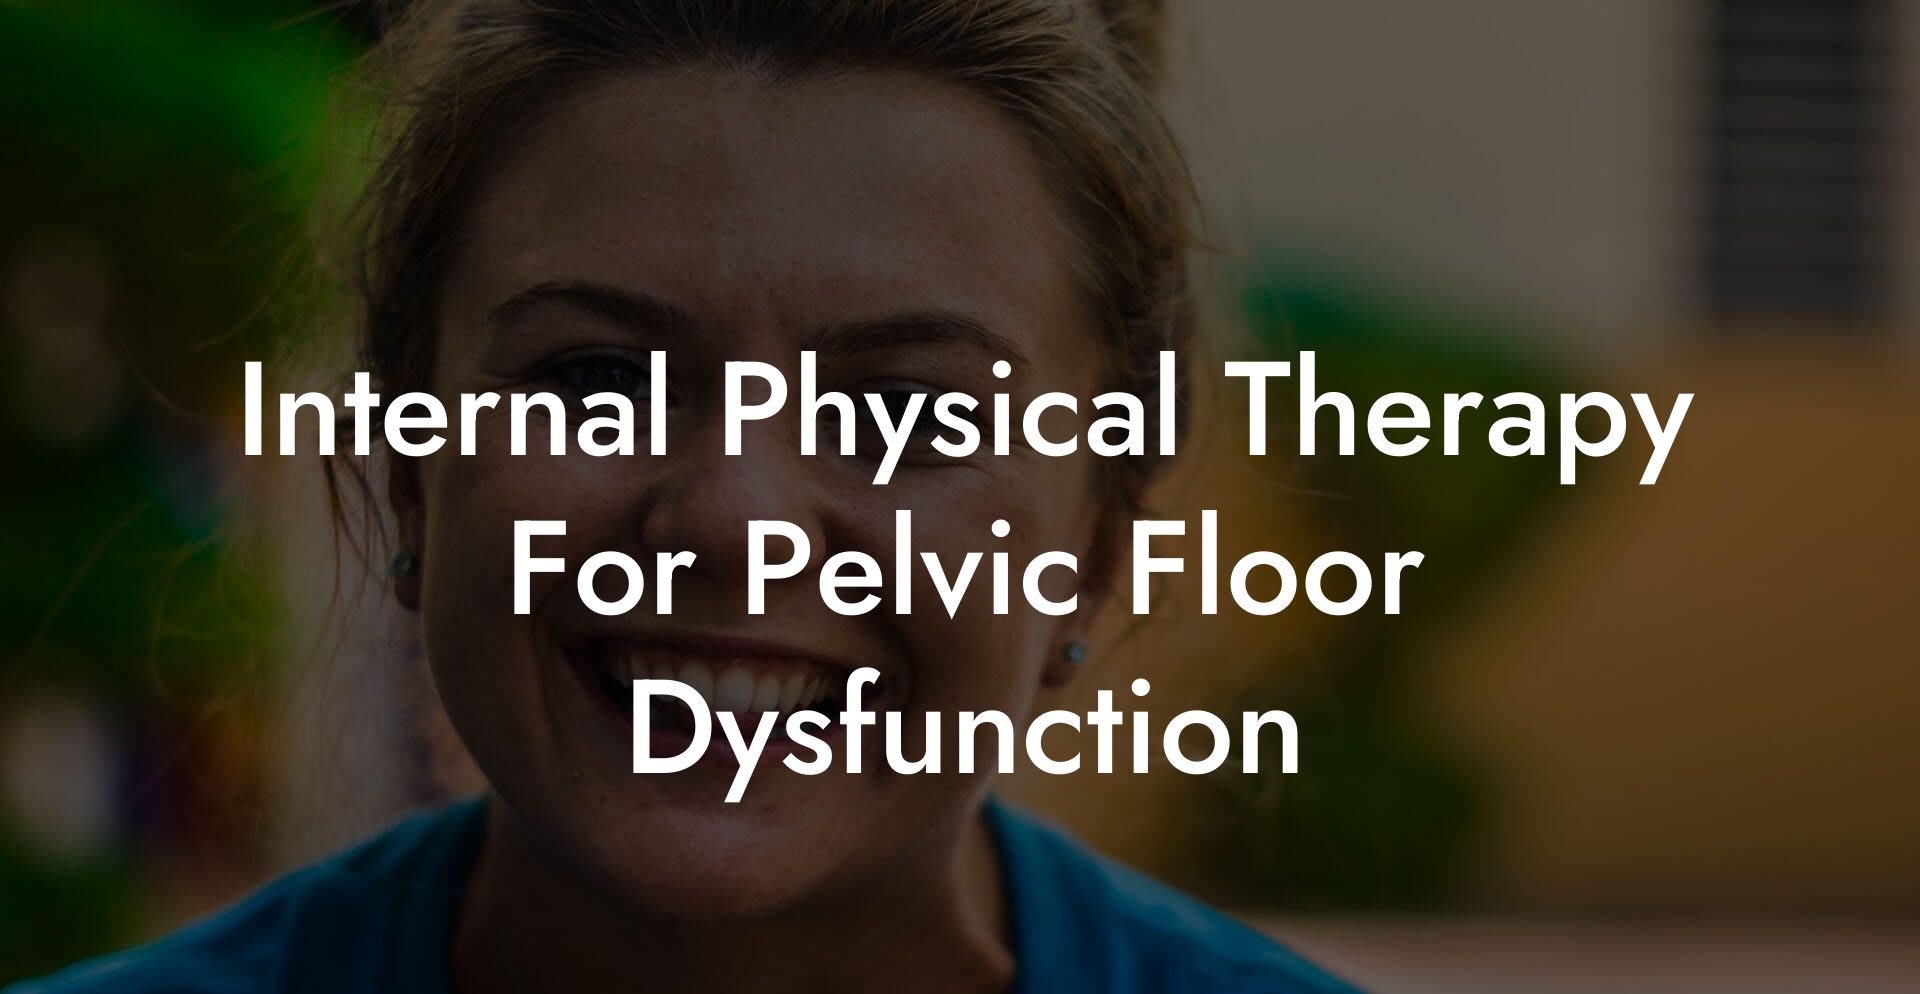 Internal Physical Therapy For Pelvic Floor Dysfunction